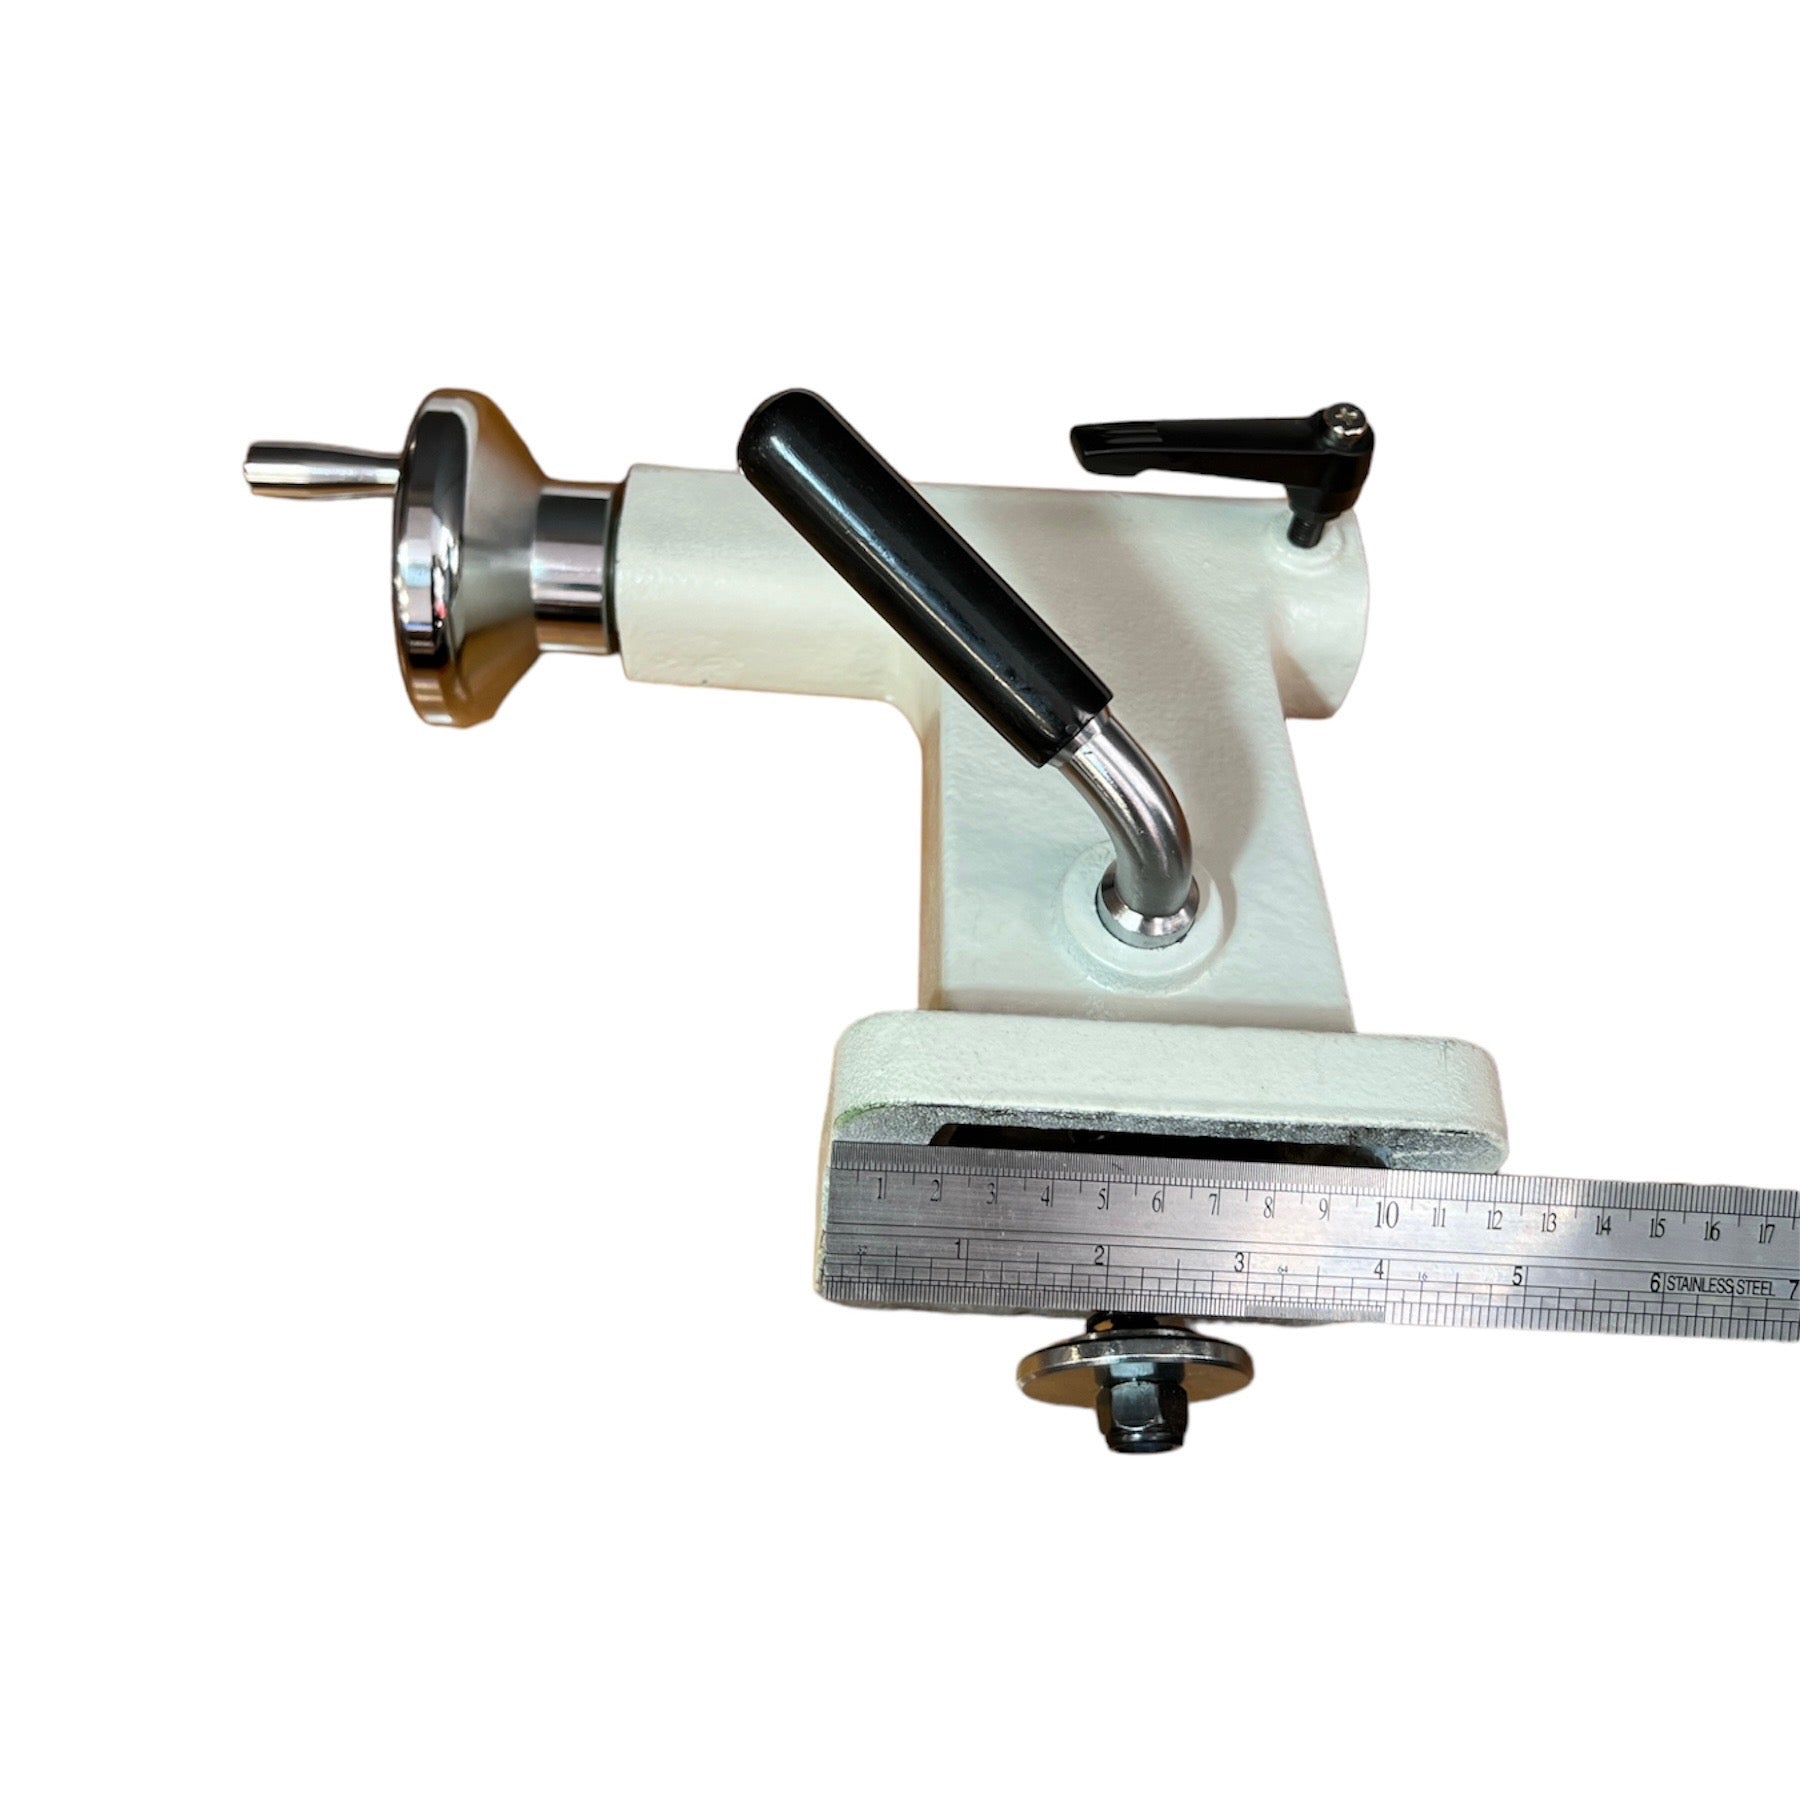 Tailstock suit WL1220A by Woodfast